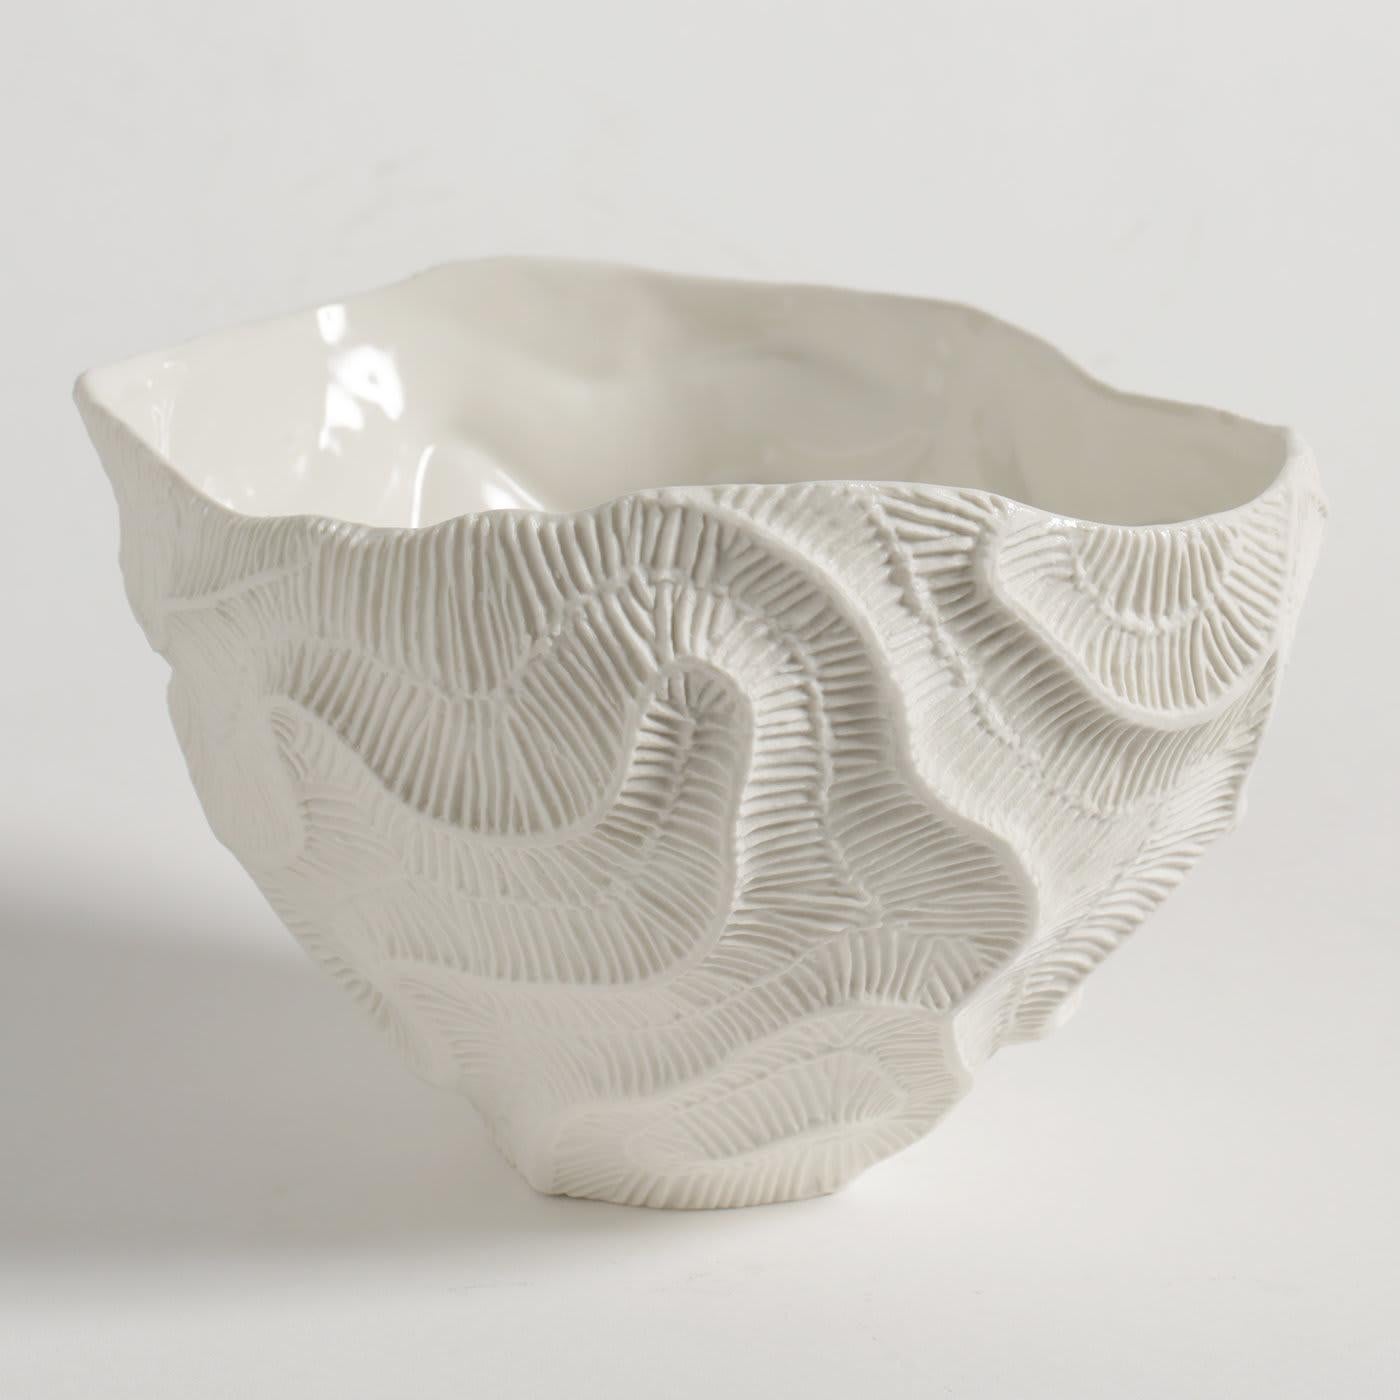 Fossils of madrepore inspire the minute texture decorating this exquisite bowl of the Fossilia collection. A meticulously crafted mold and the use of precious unglazed porcelain, or 